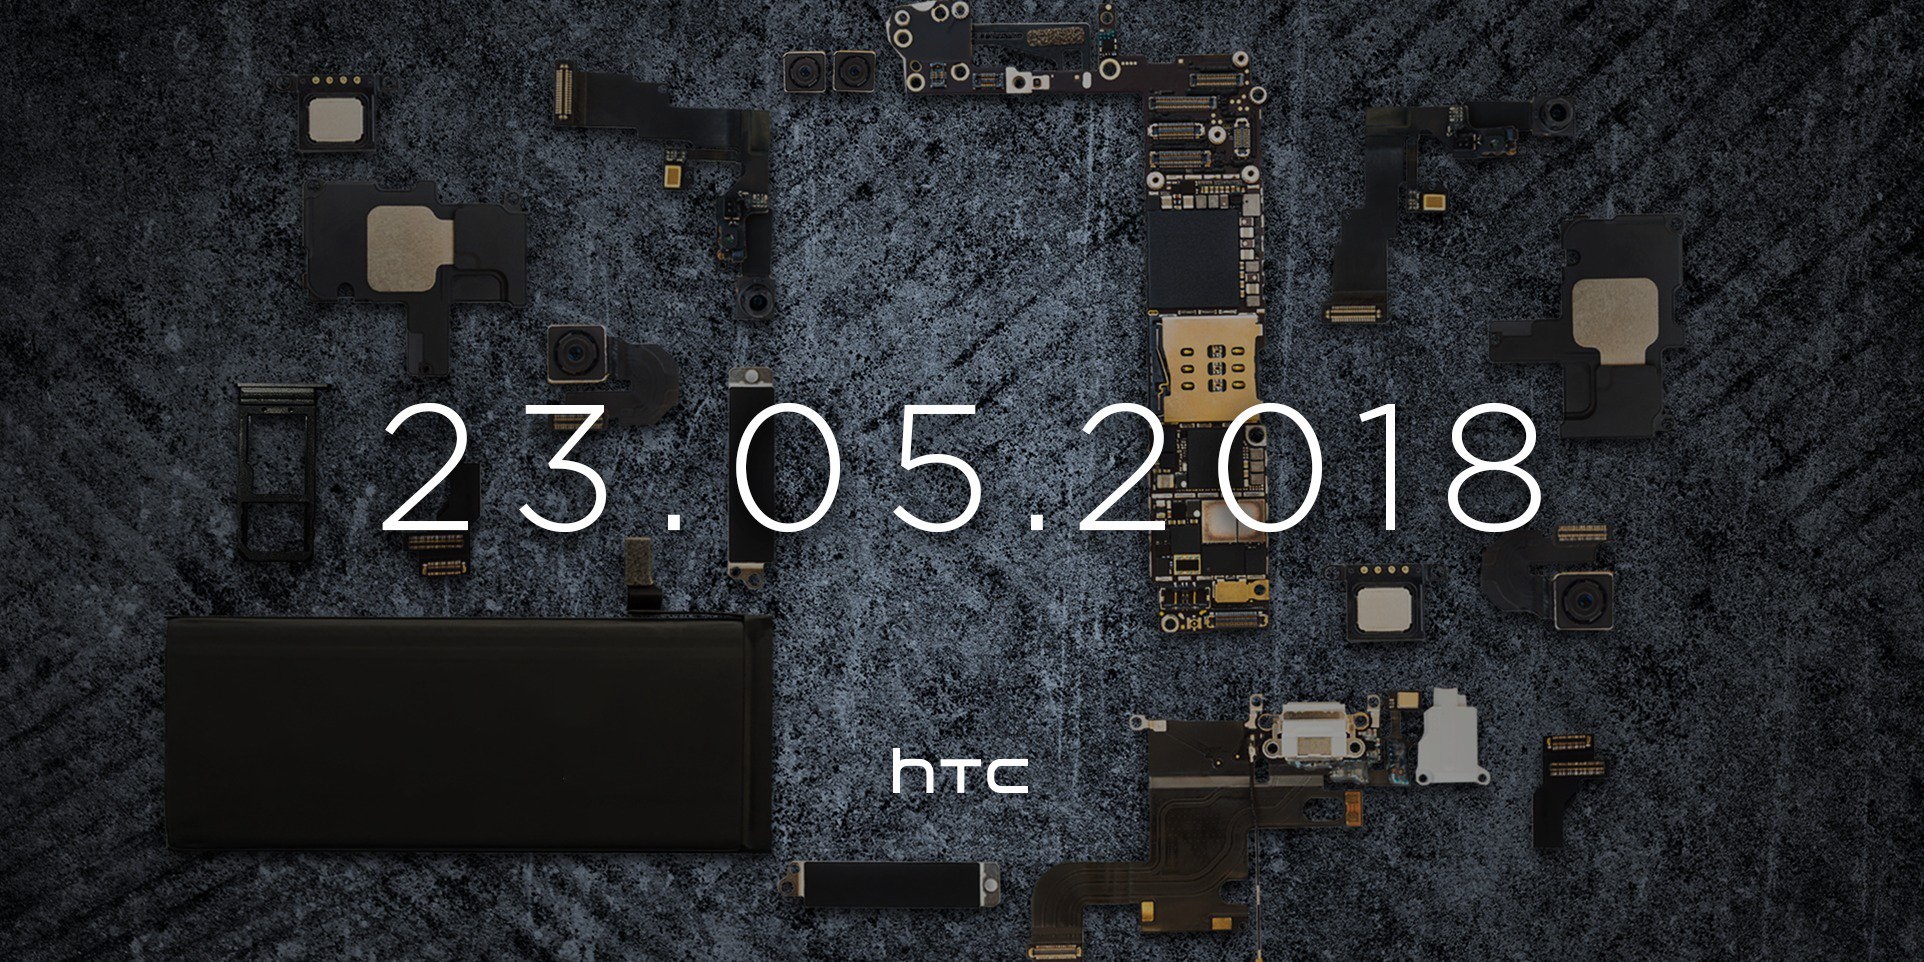 HTC U12+ with Android Oreo Expected to Launch on May 23